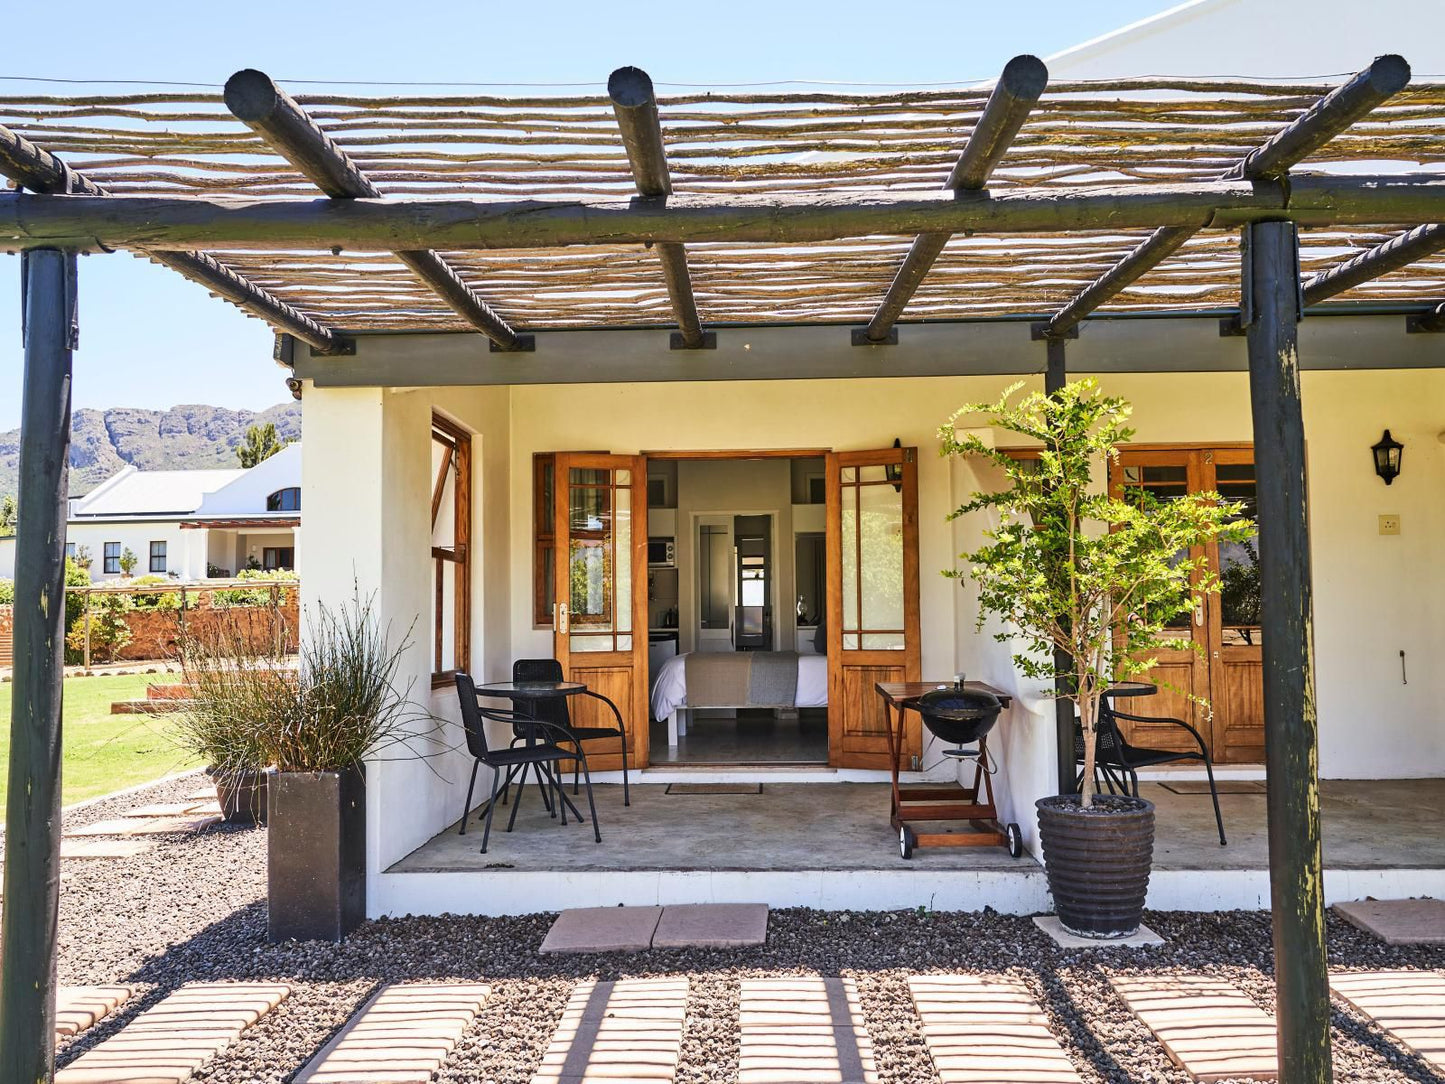 Raptor Rise Tulbagh Western Cape South Africa House, Building, Architecture